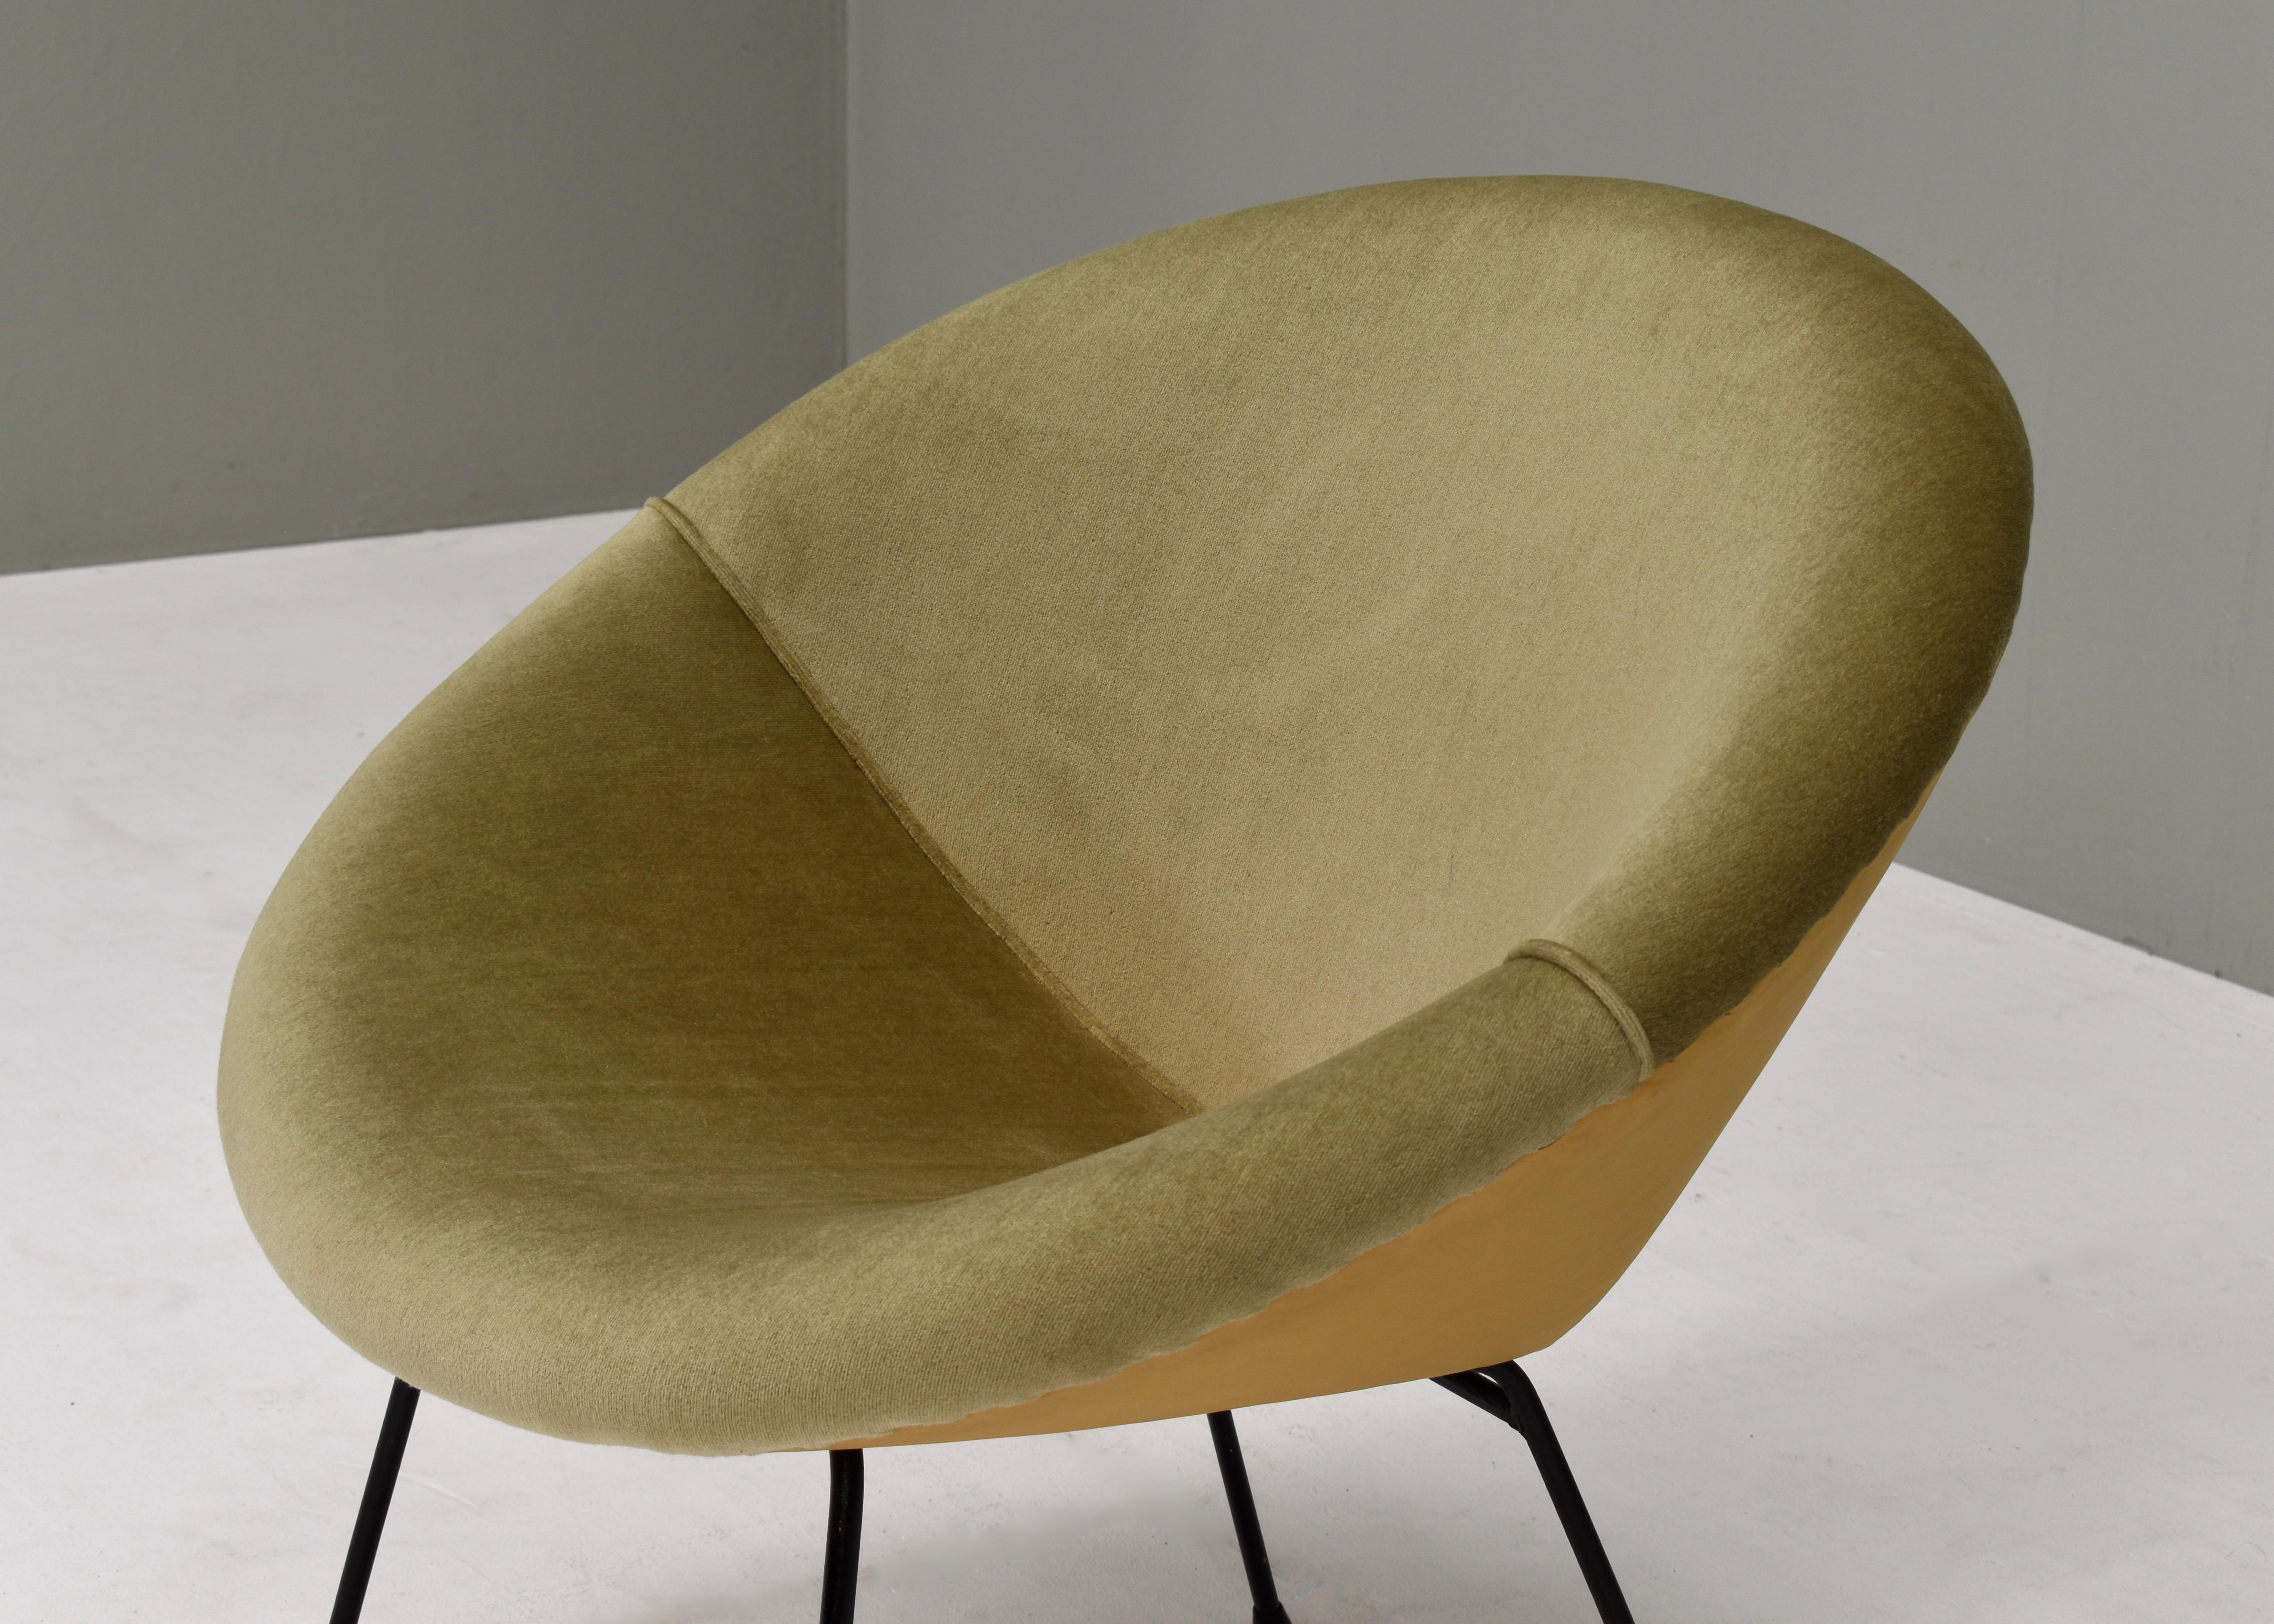 Mid-20th Century Sculptural Circle Chair in Original Mohair Velvet and Black Metal Base, 1950's For Sale